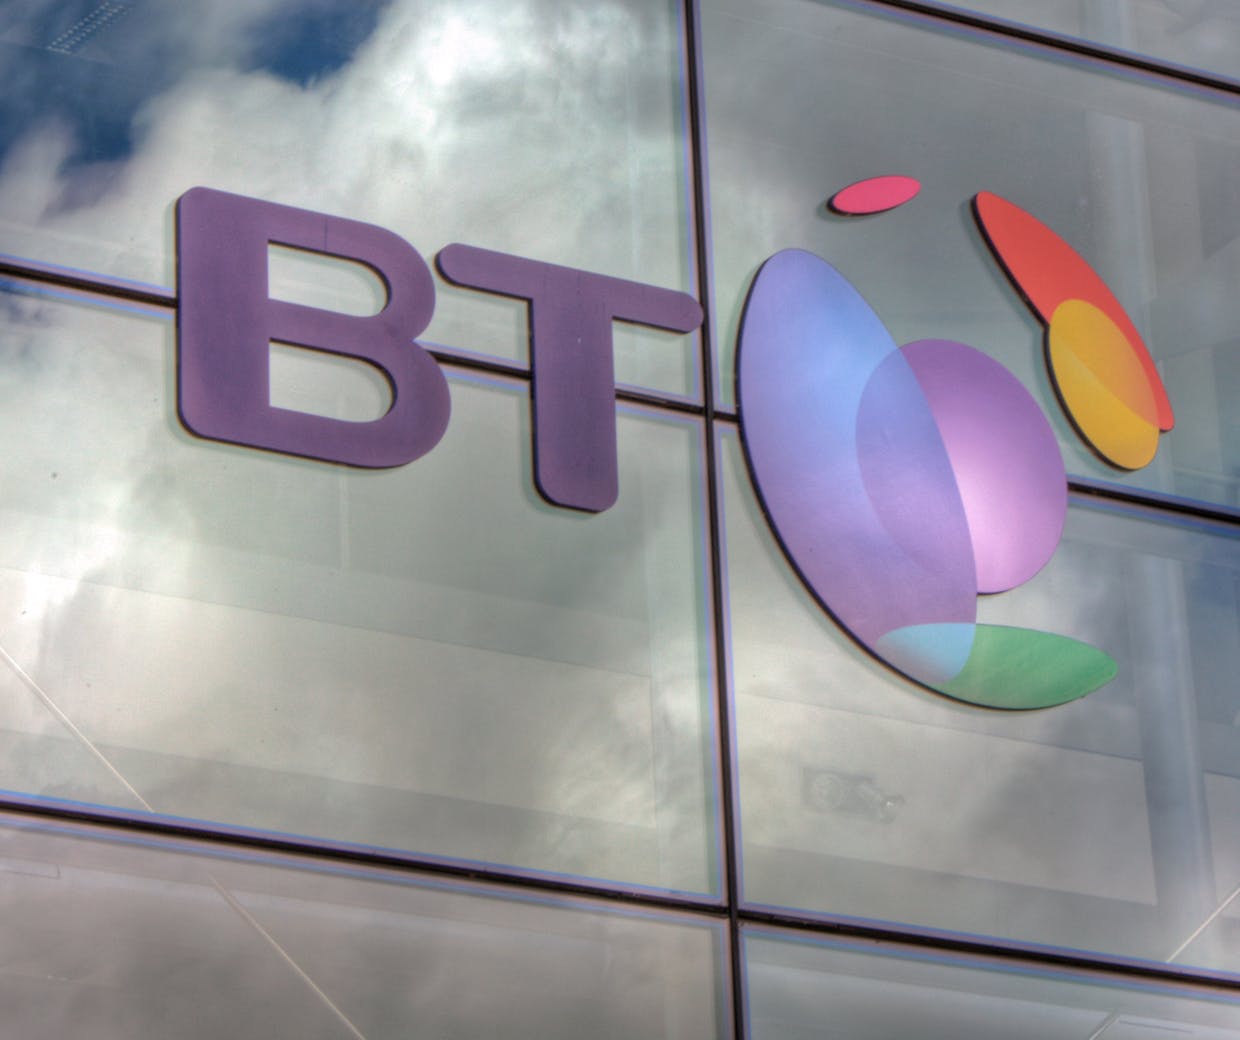 Direct Mail News 9/11/18: BT Used Targeted Mail to Surprise and Switch Broadband Customers